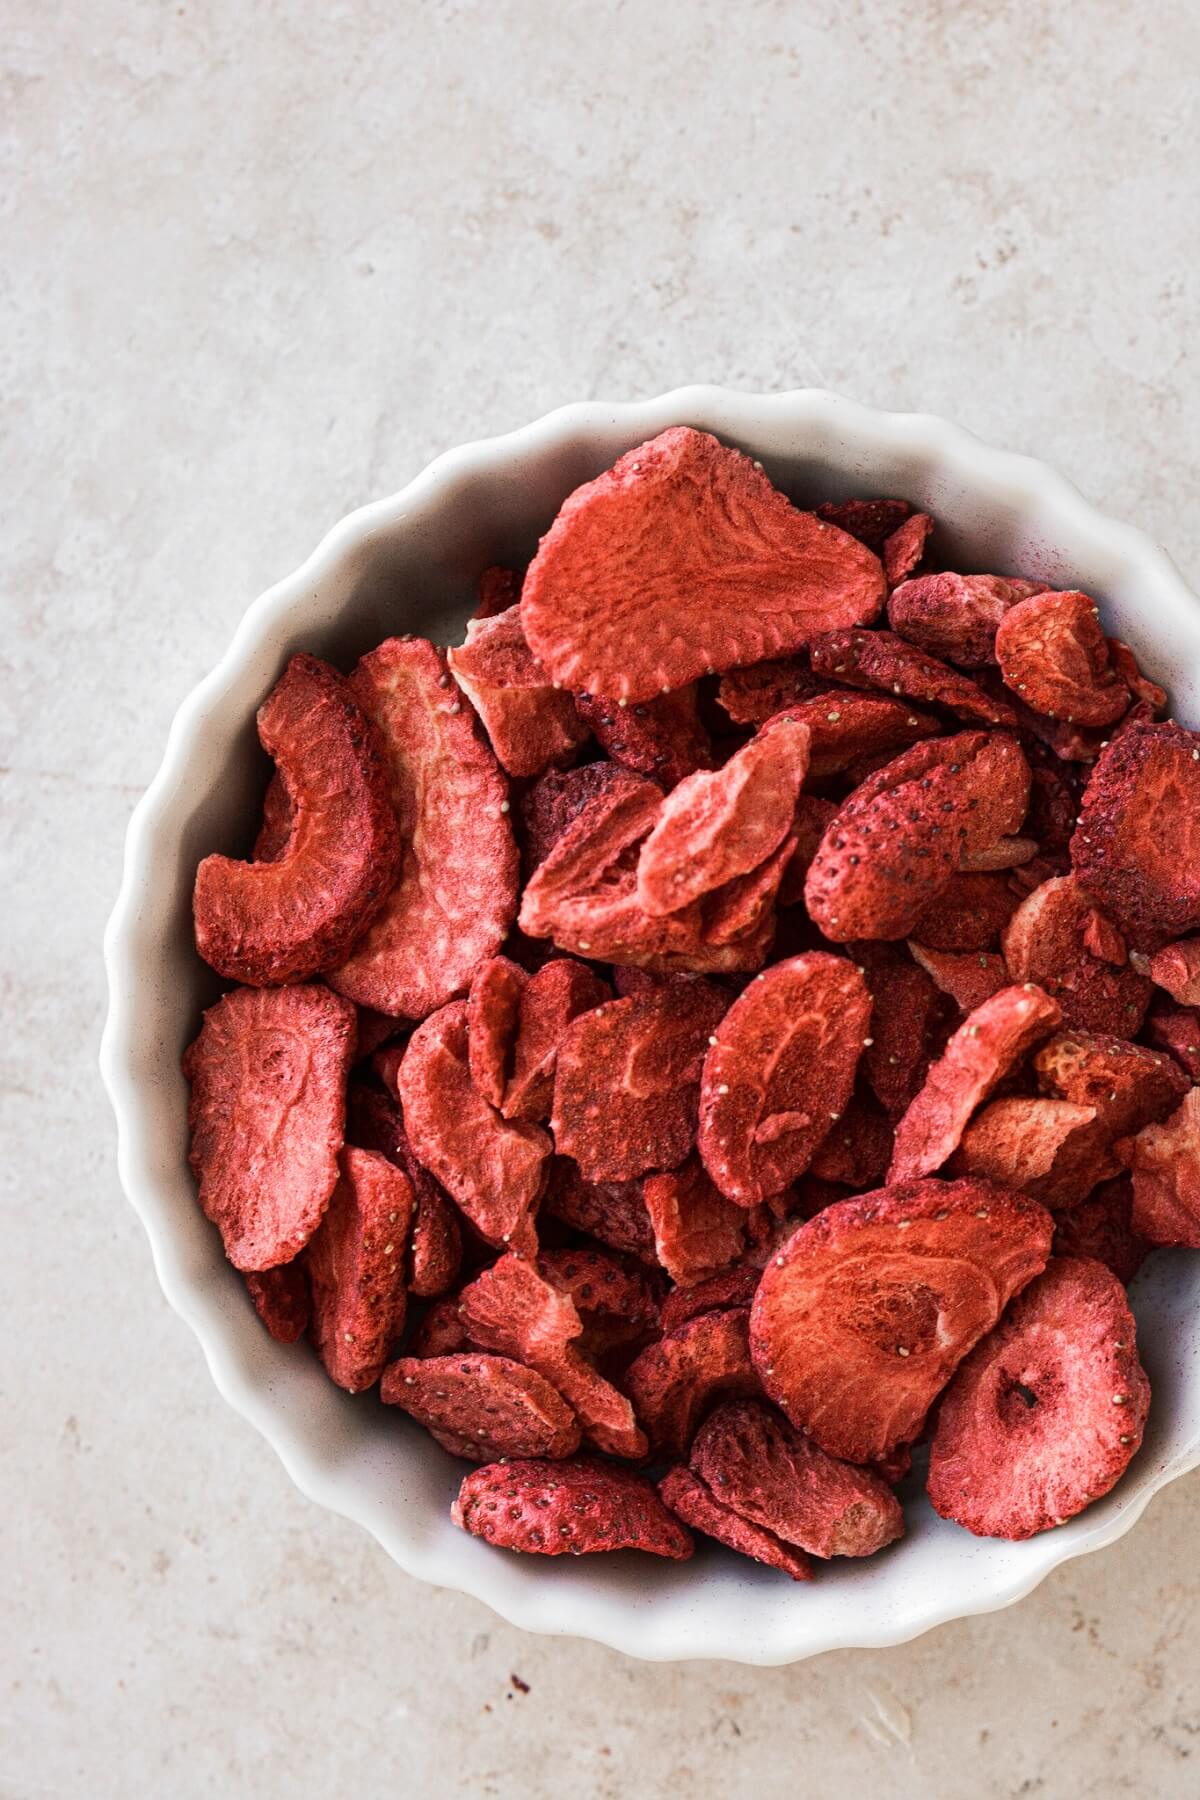 Bowl of freeze dried strawberries.